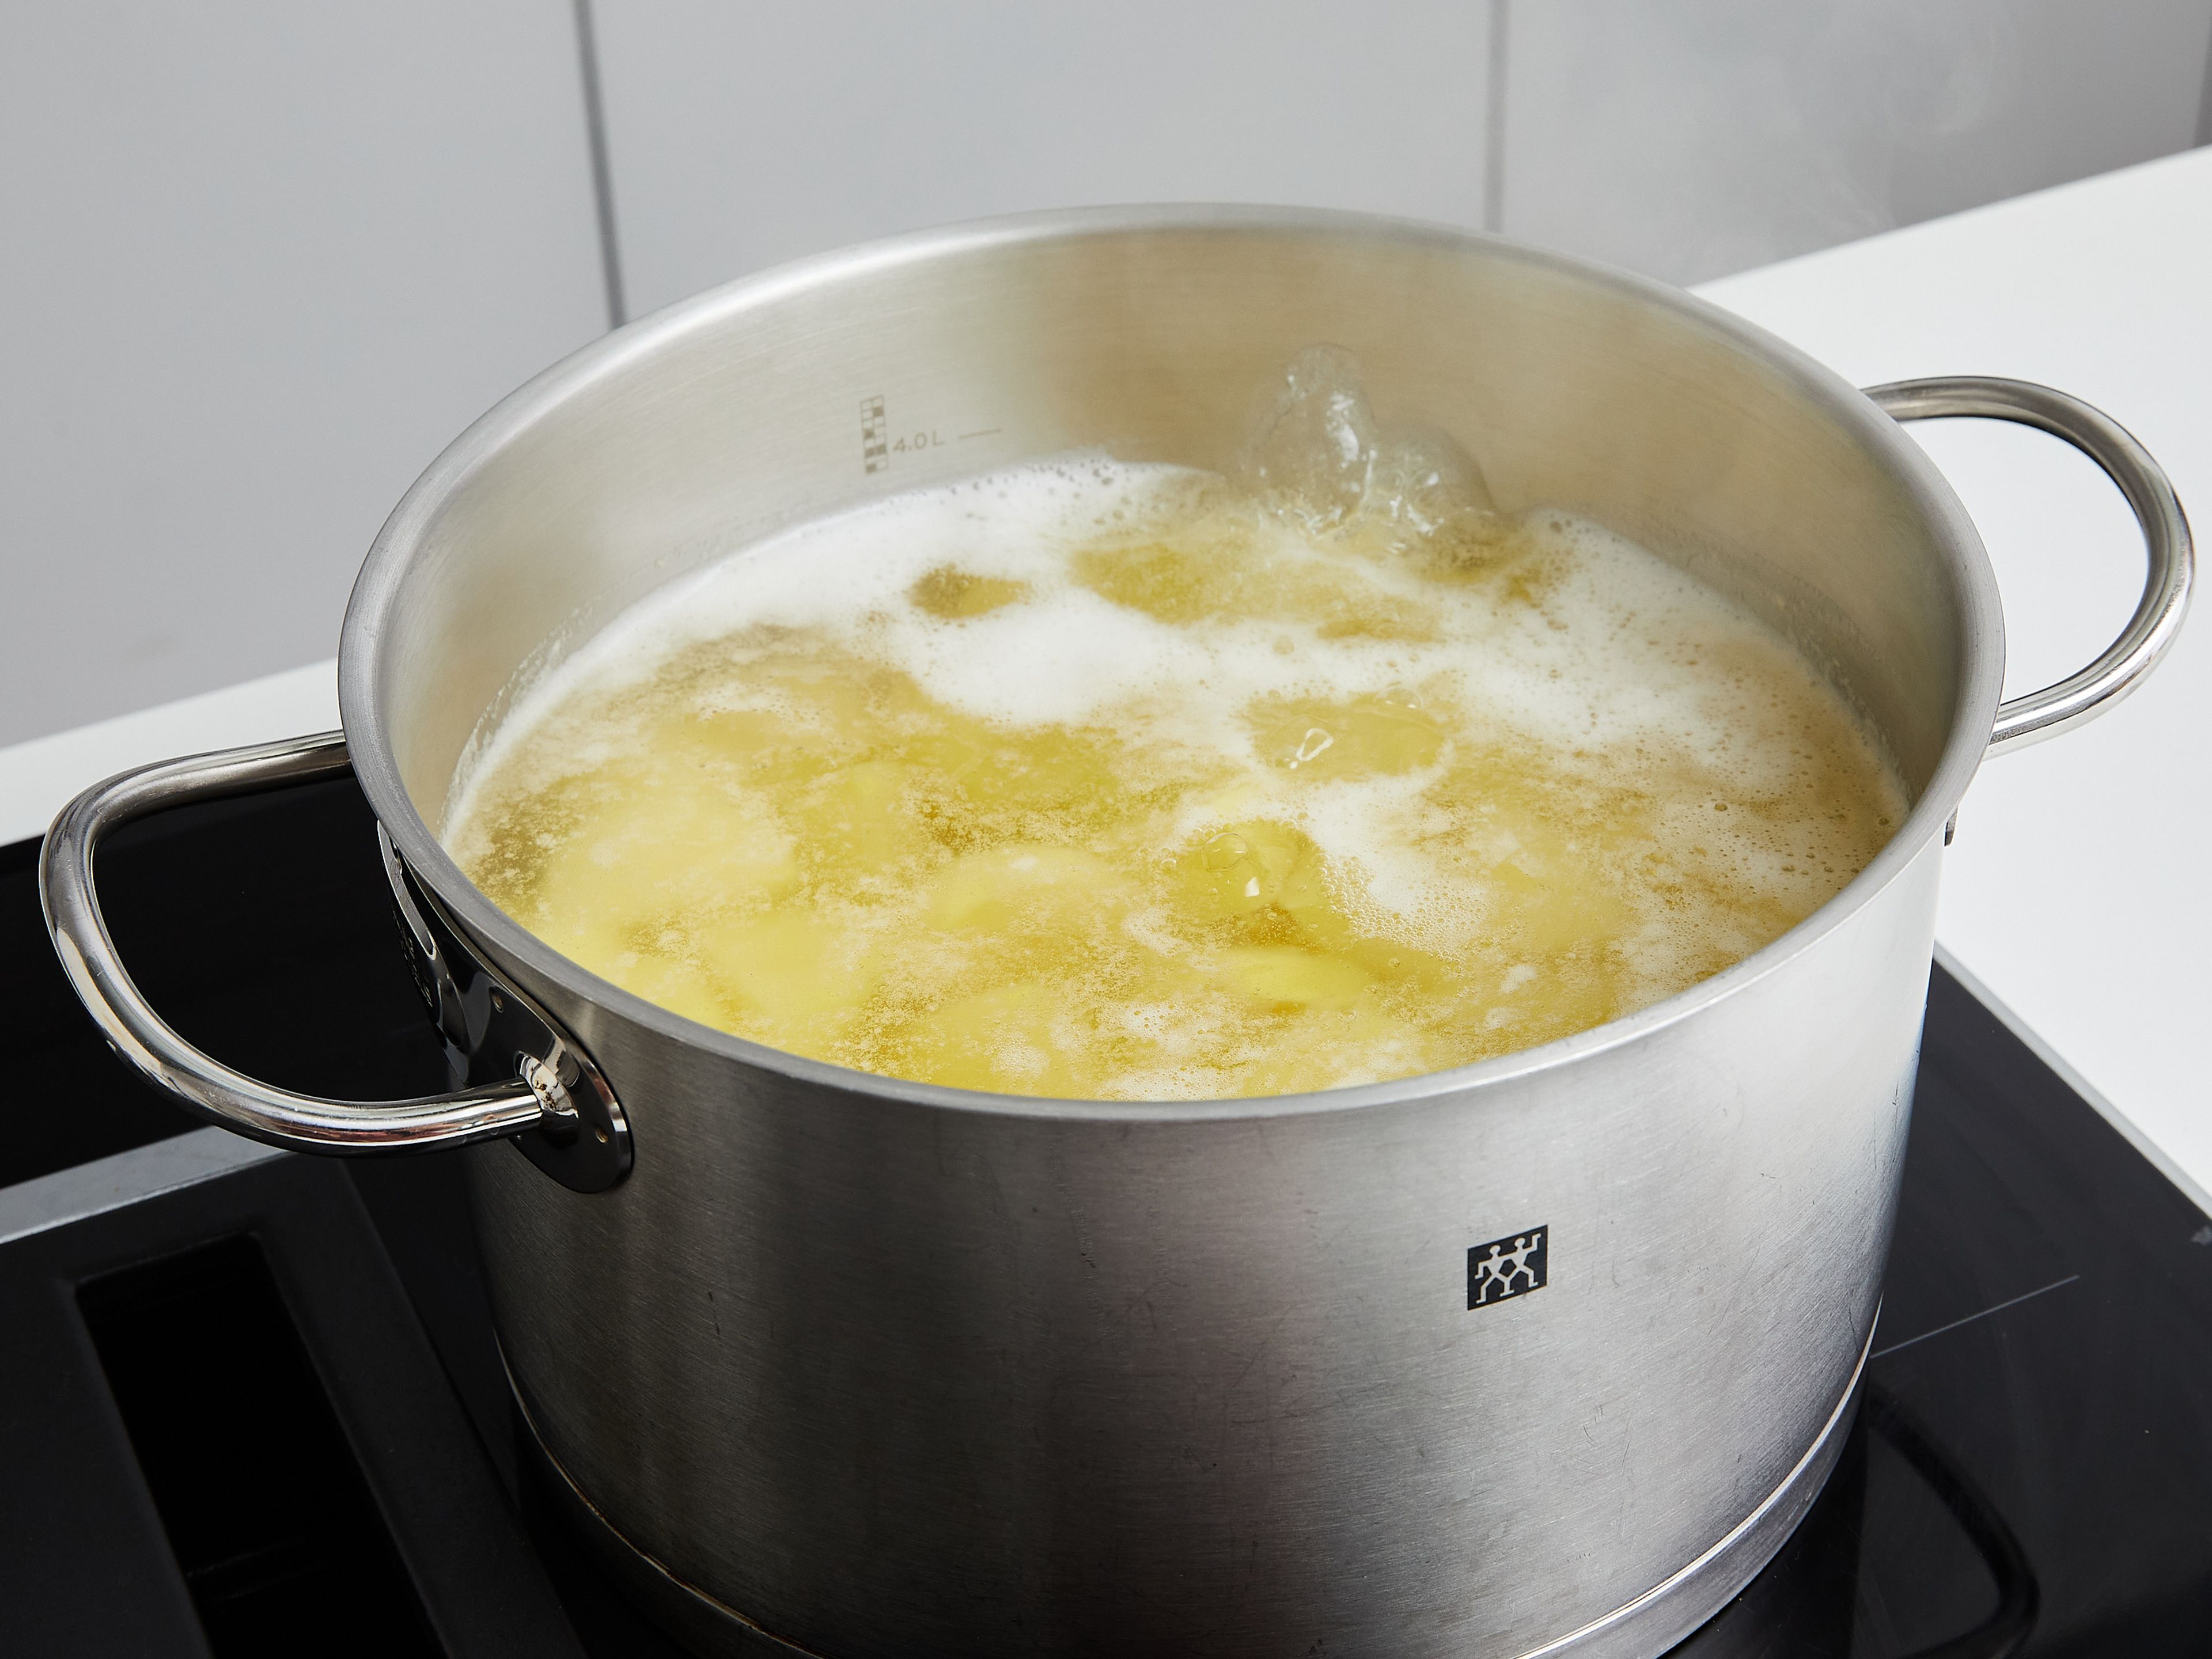 Preheat oven to 220°C/450°F top bottom heat, or 200°C/400°F convection. Peel potatoes and cut them into big chunks, about 4 - 5 cm (1 - 2 in.) in size. Bring 2L water to a boil in a large pot over high heat. Add salt, baking soda, and potatoes. Stir to combine. Bring to a boil again, reduce heat to a simmer and cook for approx. 10 min., or until a knife meets little resistance when piercing a piece of potato.